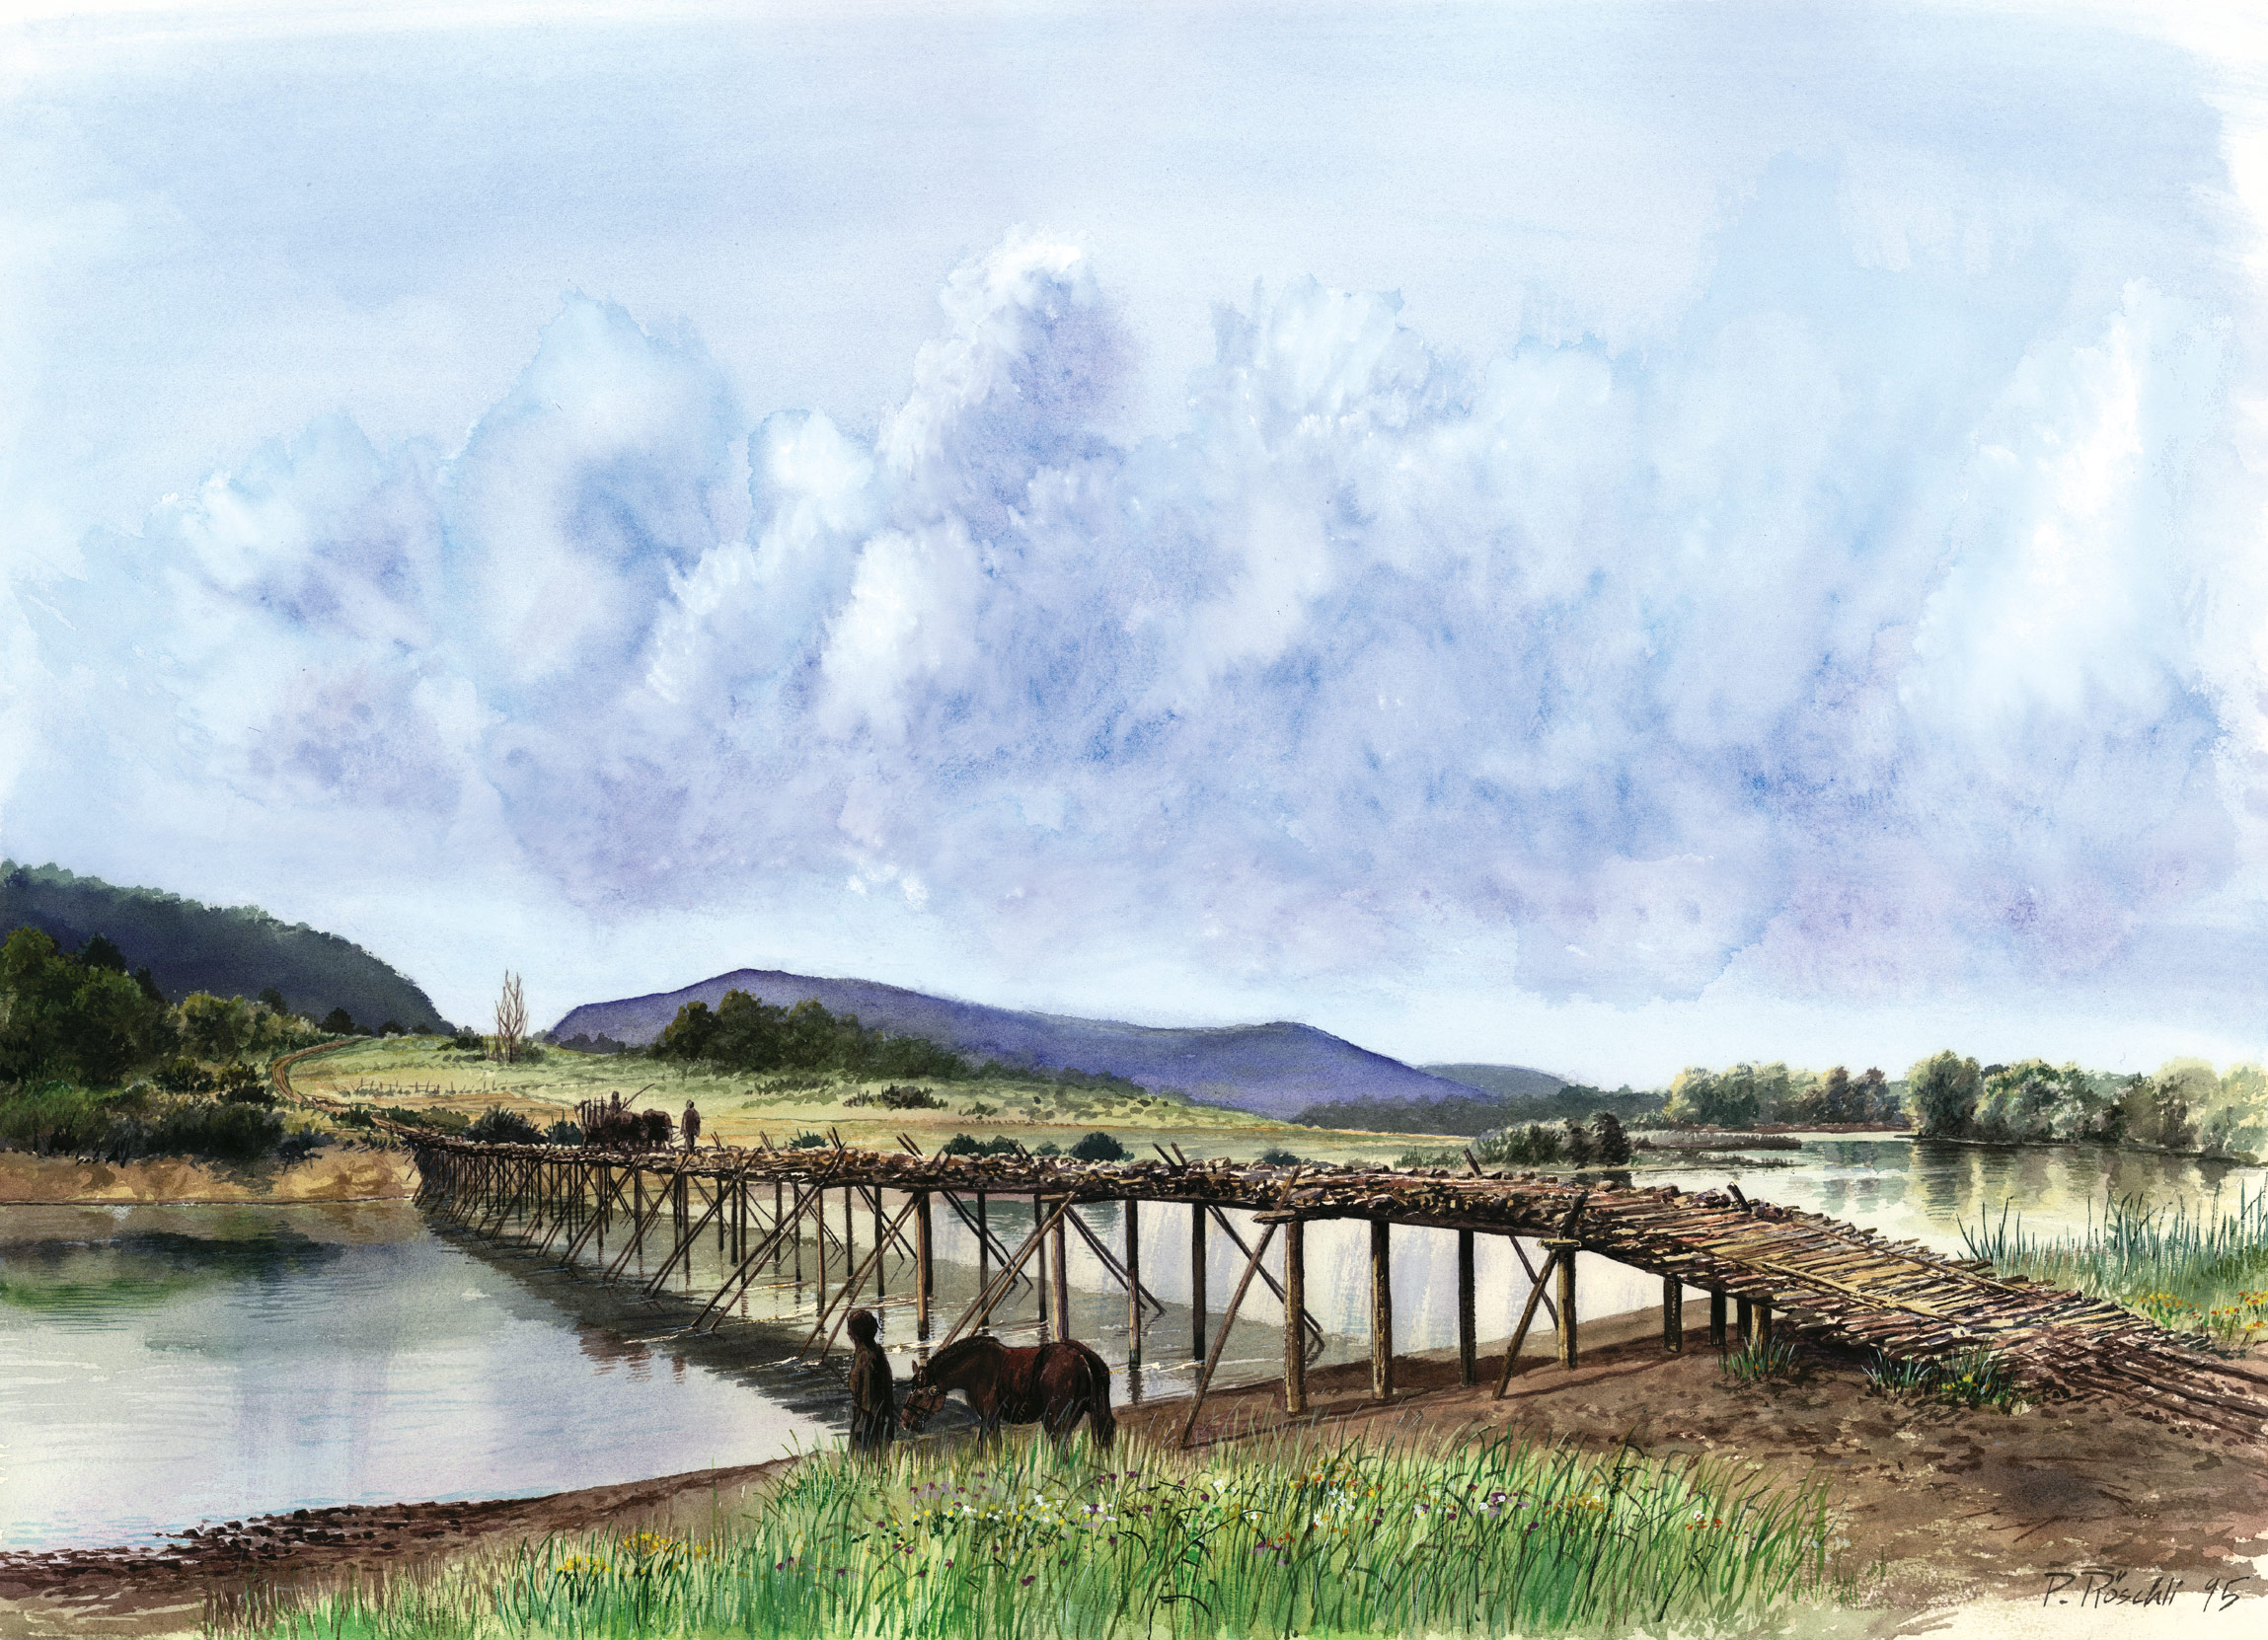 Artistic reconstruction of the Cornaux/Les Sauges bridge by P. Roeschli. A wooden bridge built on posts in the water.